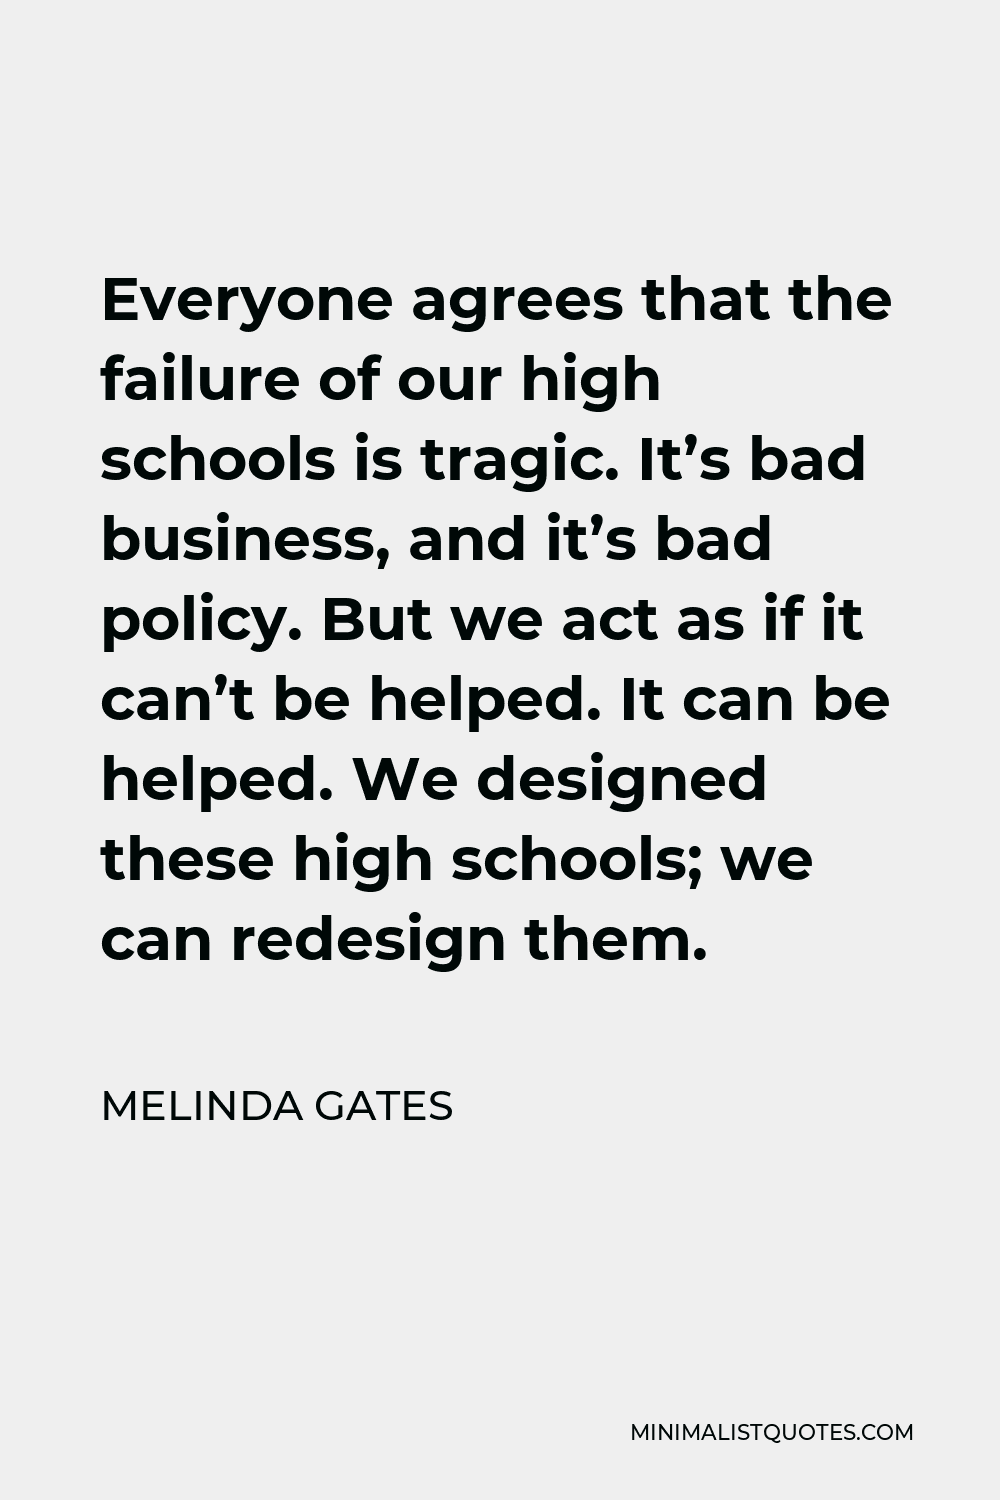 Melinda Gates Quote - Everyone agrees that the failure of our high schools is tragic. It’s bad business, and it’s bad policy. But we act as if it can’t be helped. It can be helped. We designed these high schools; we can redesign them.